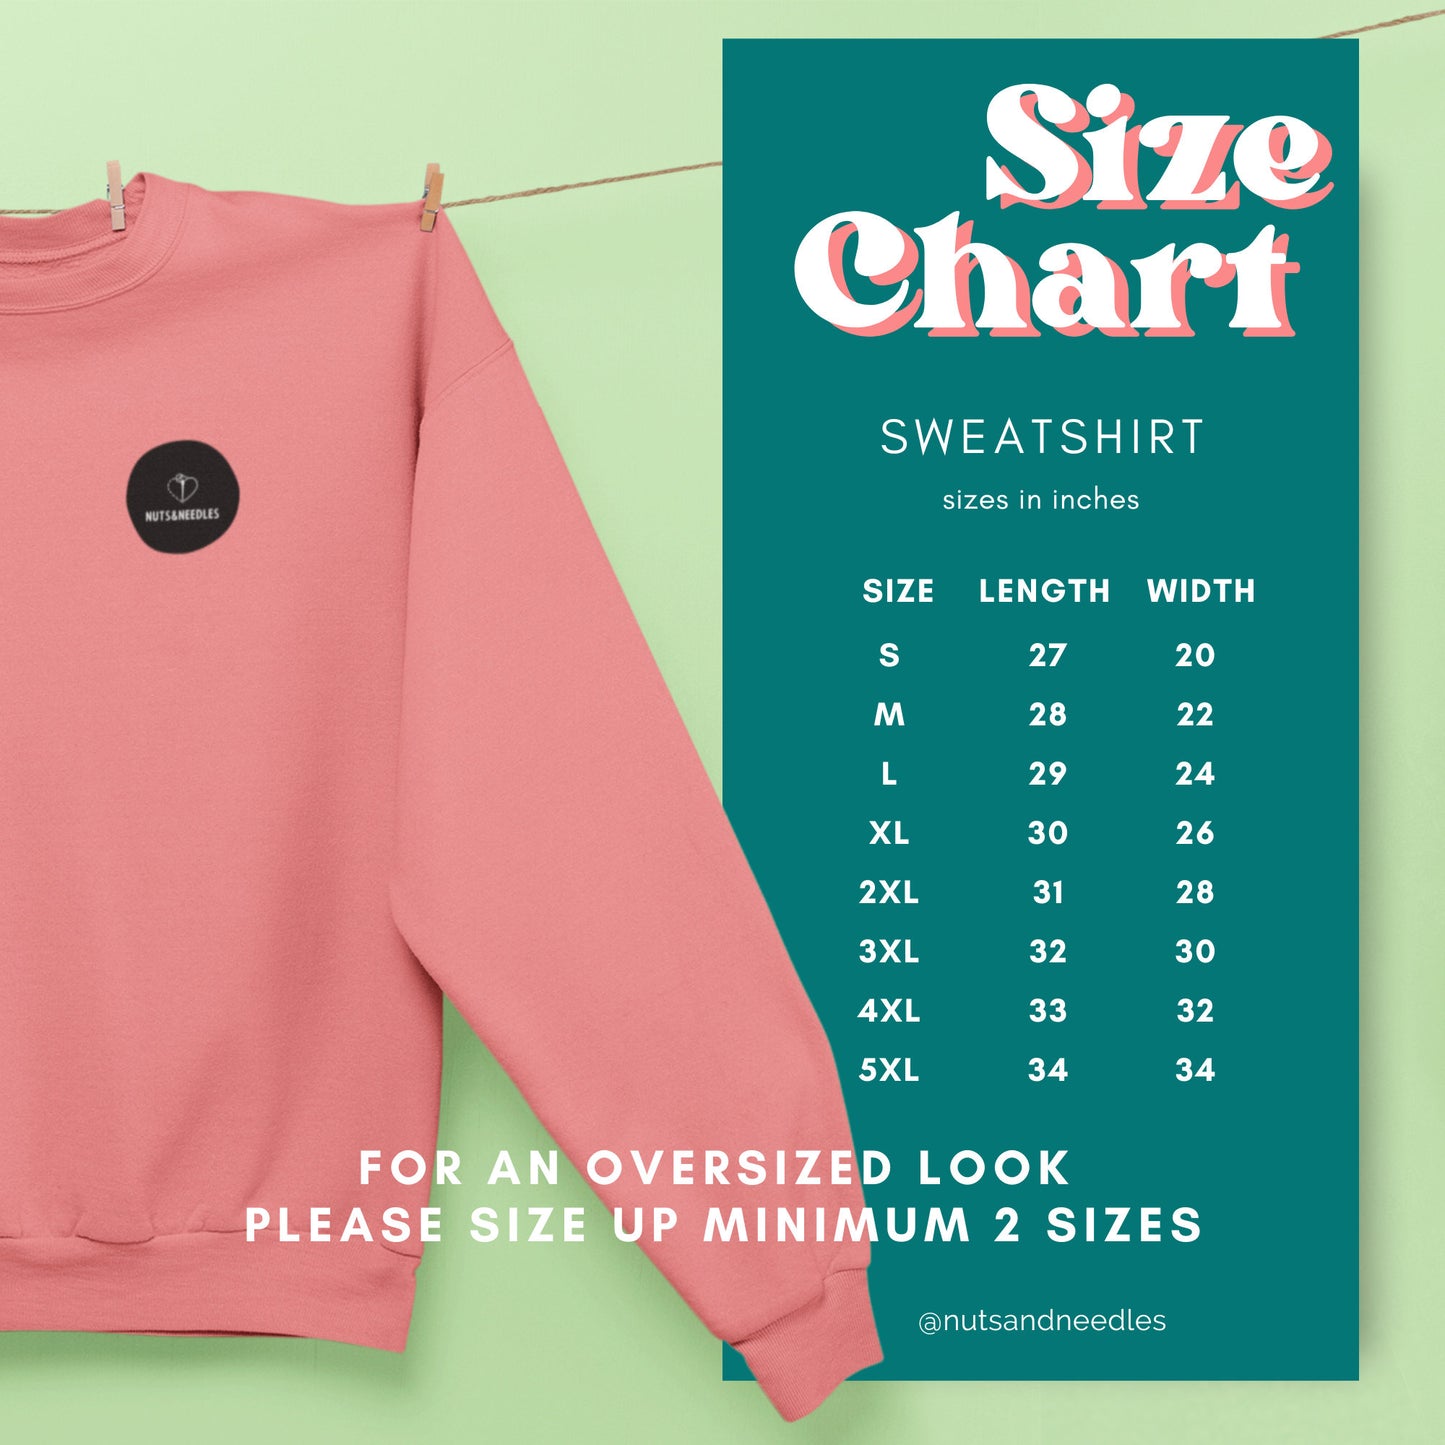 Mental Health Sweatshirt 'Don't Ghost Your Feelings', Valentines Day, Self Love, Self Care, Part of Profit donated to charity, Unisex